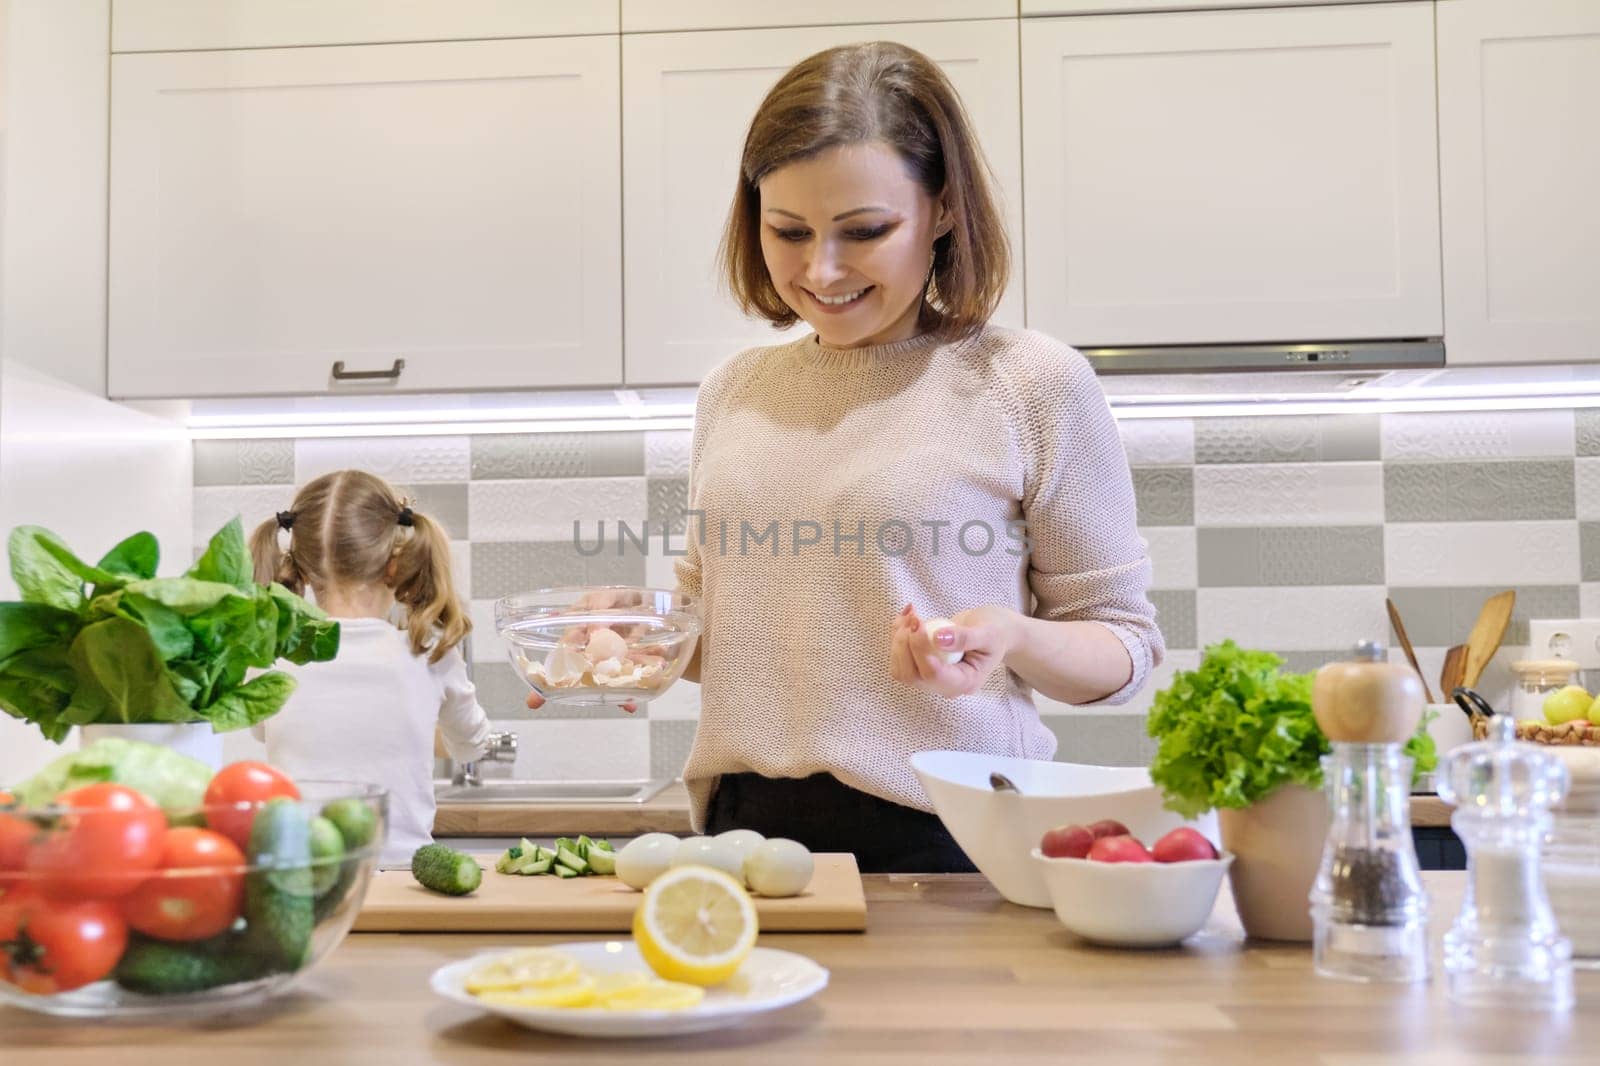 Smiling mother and daughter cooking together in kitchen vegetable salad. Healthy home food, communication parent and child. Woman with shelling eggs child near kitchen sink